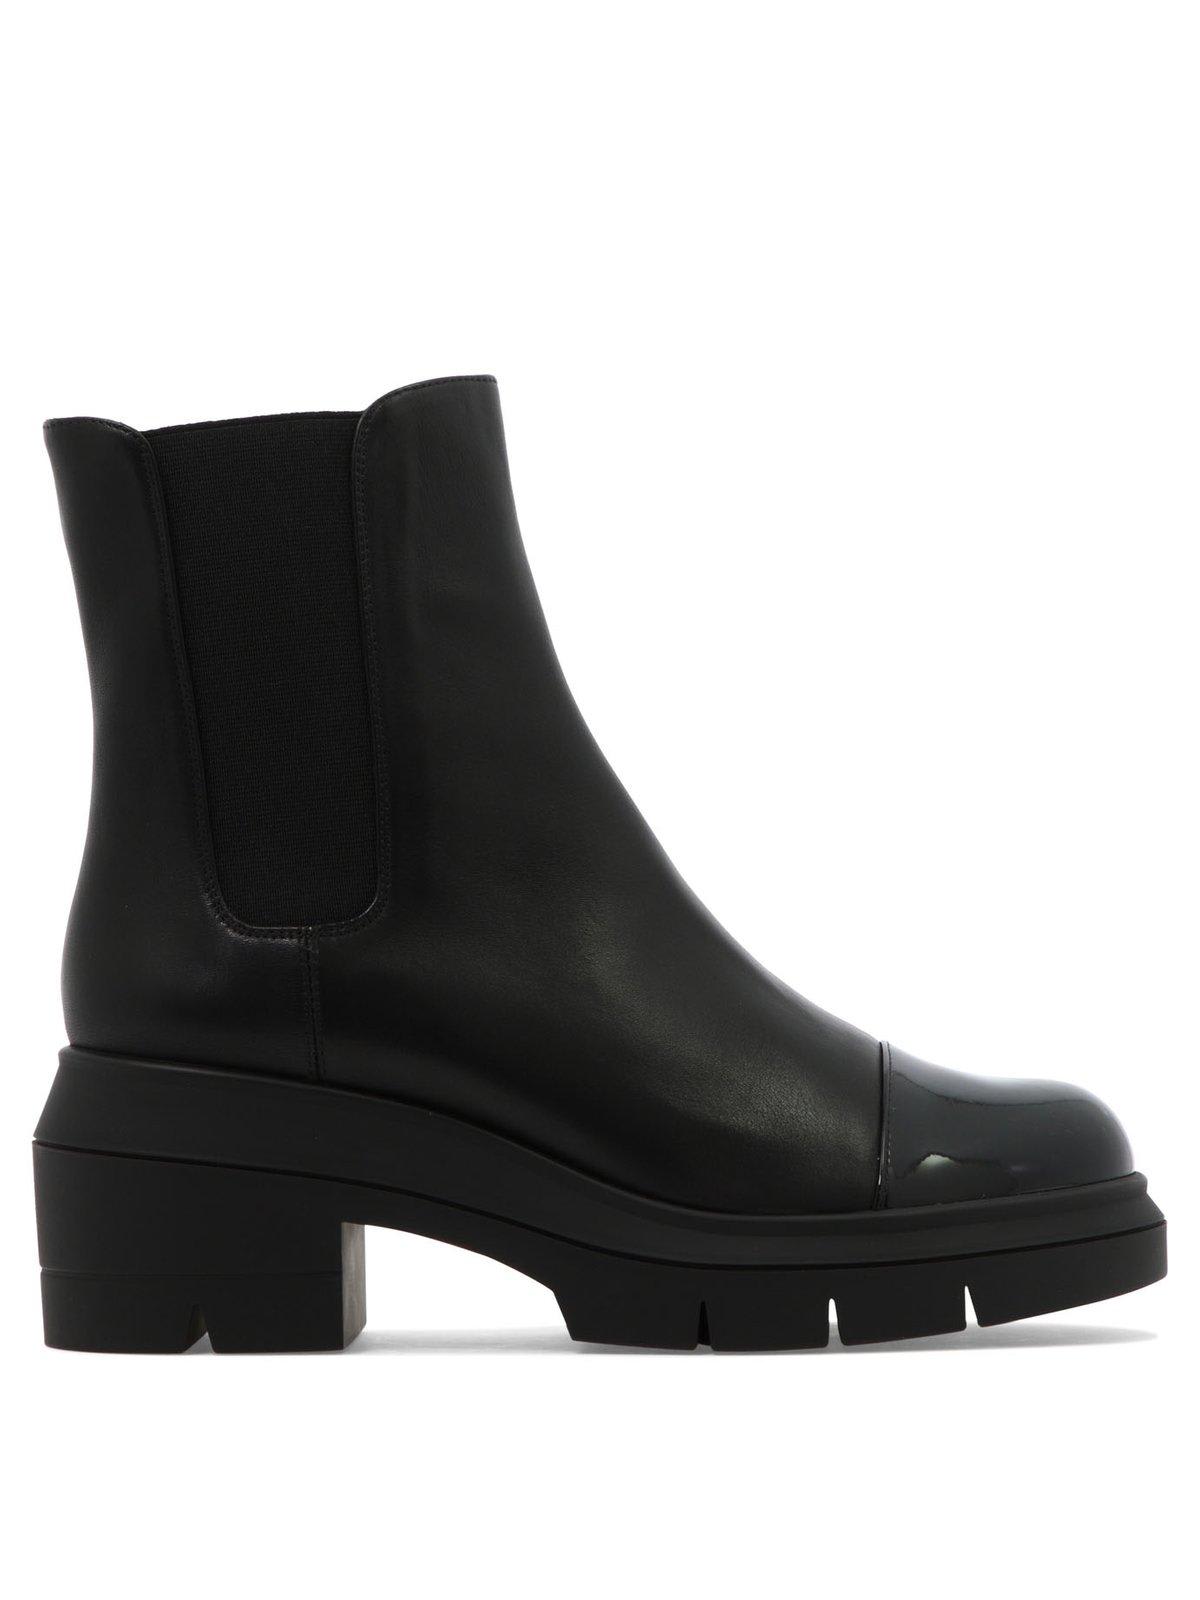 Norah Ankle Boots